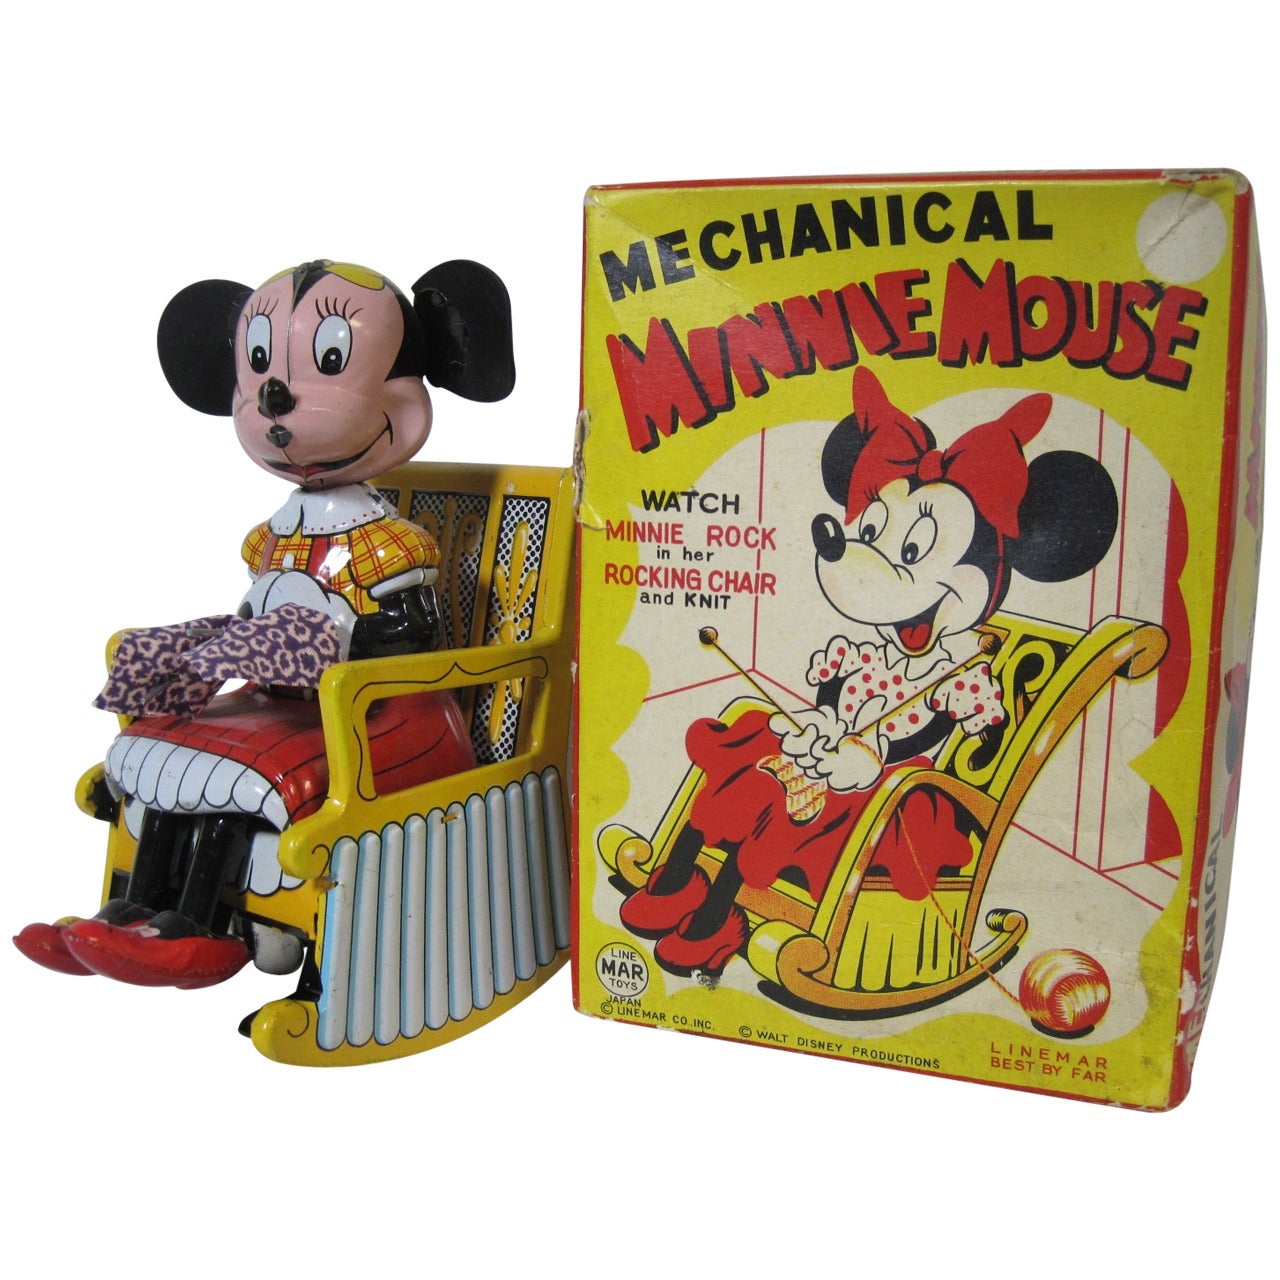 Minnie Mouse Tin Toy, Linemar Lithographed Wind-Up with Original Box